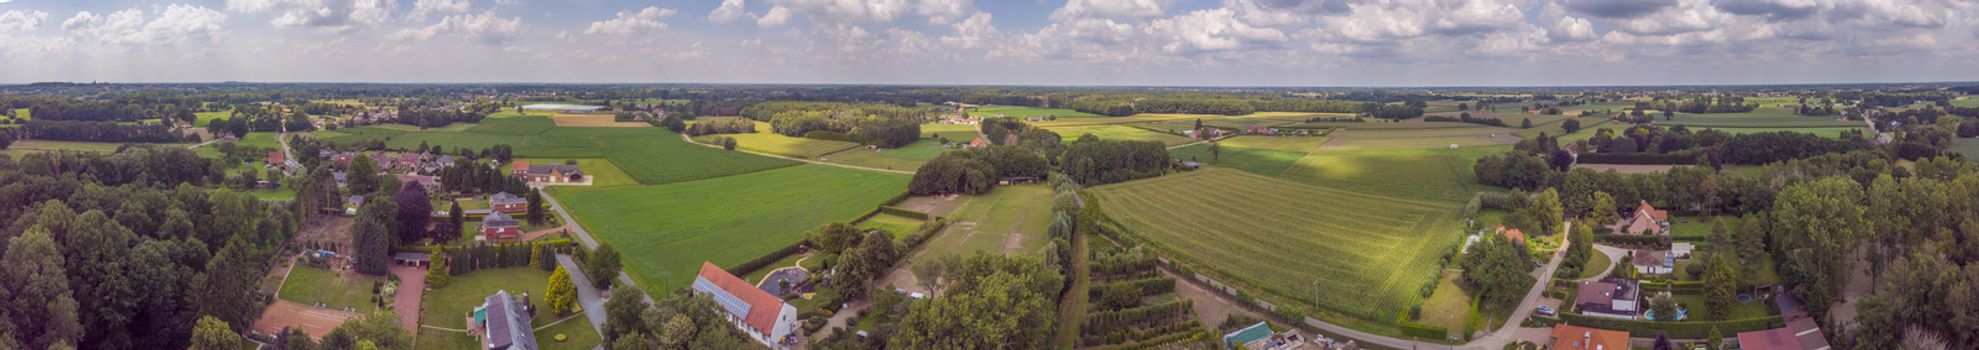 Itegem, Belgium, July 2020: Aerial panorama view on a countryside area in Belgium Kempen area with houses and agricultural fields